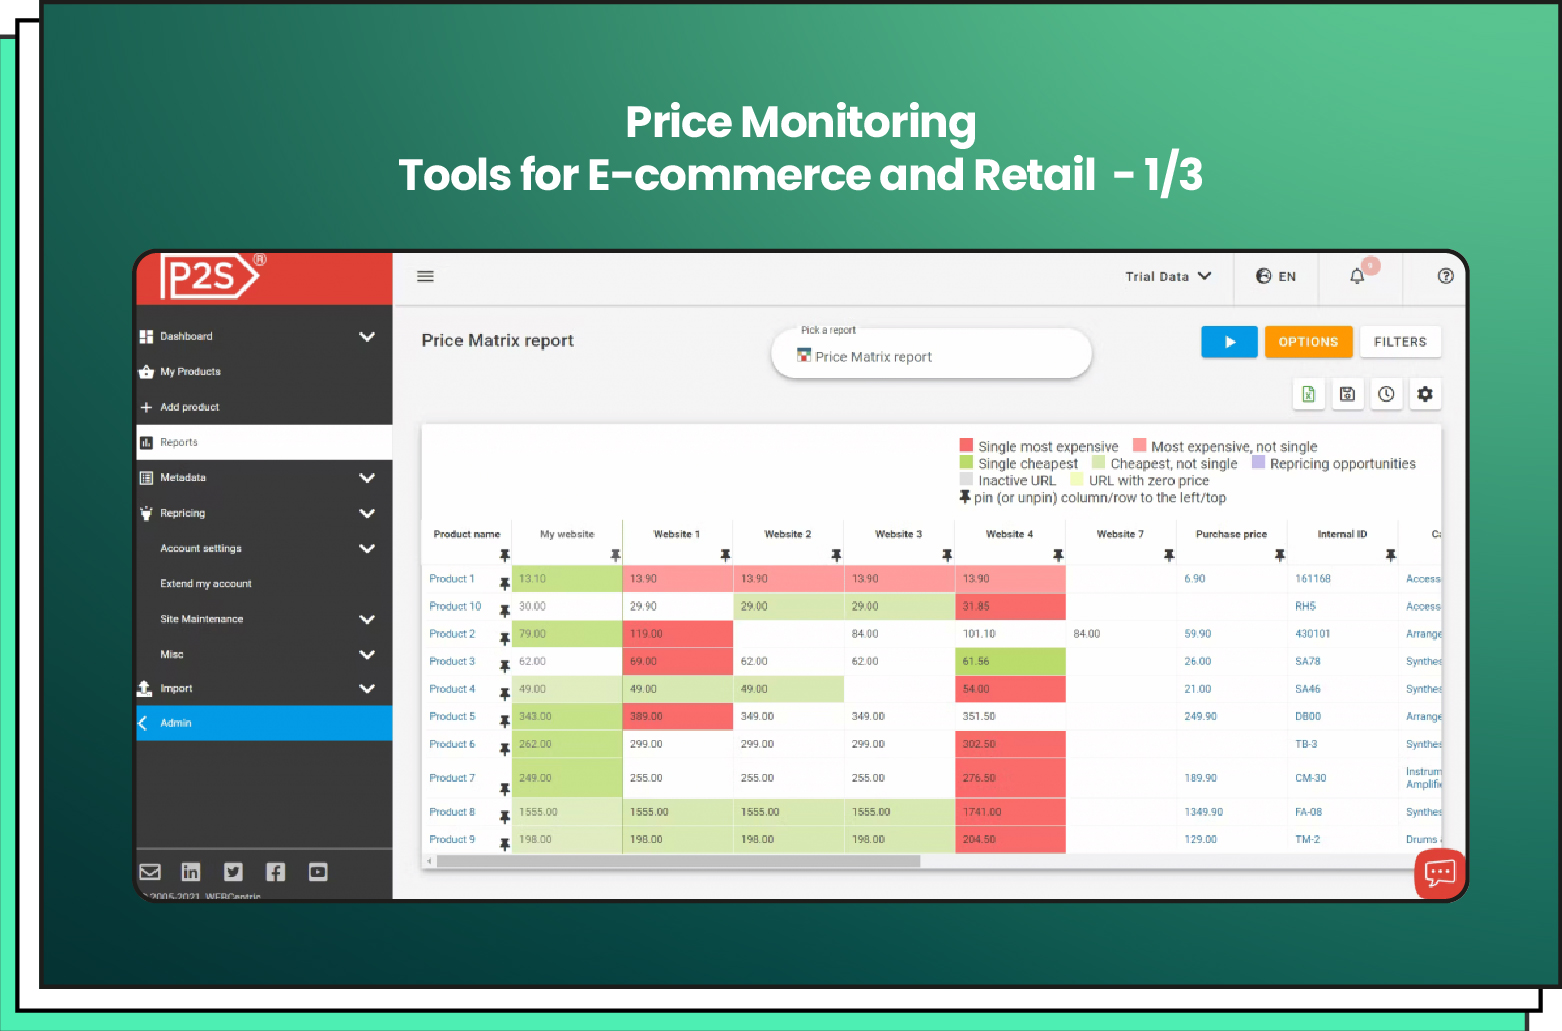 How price monitoring tool P2S works